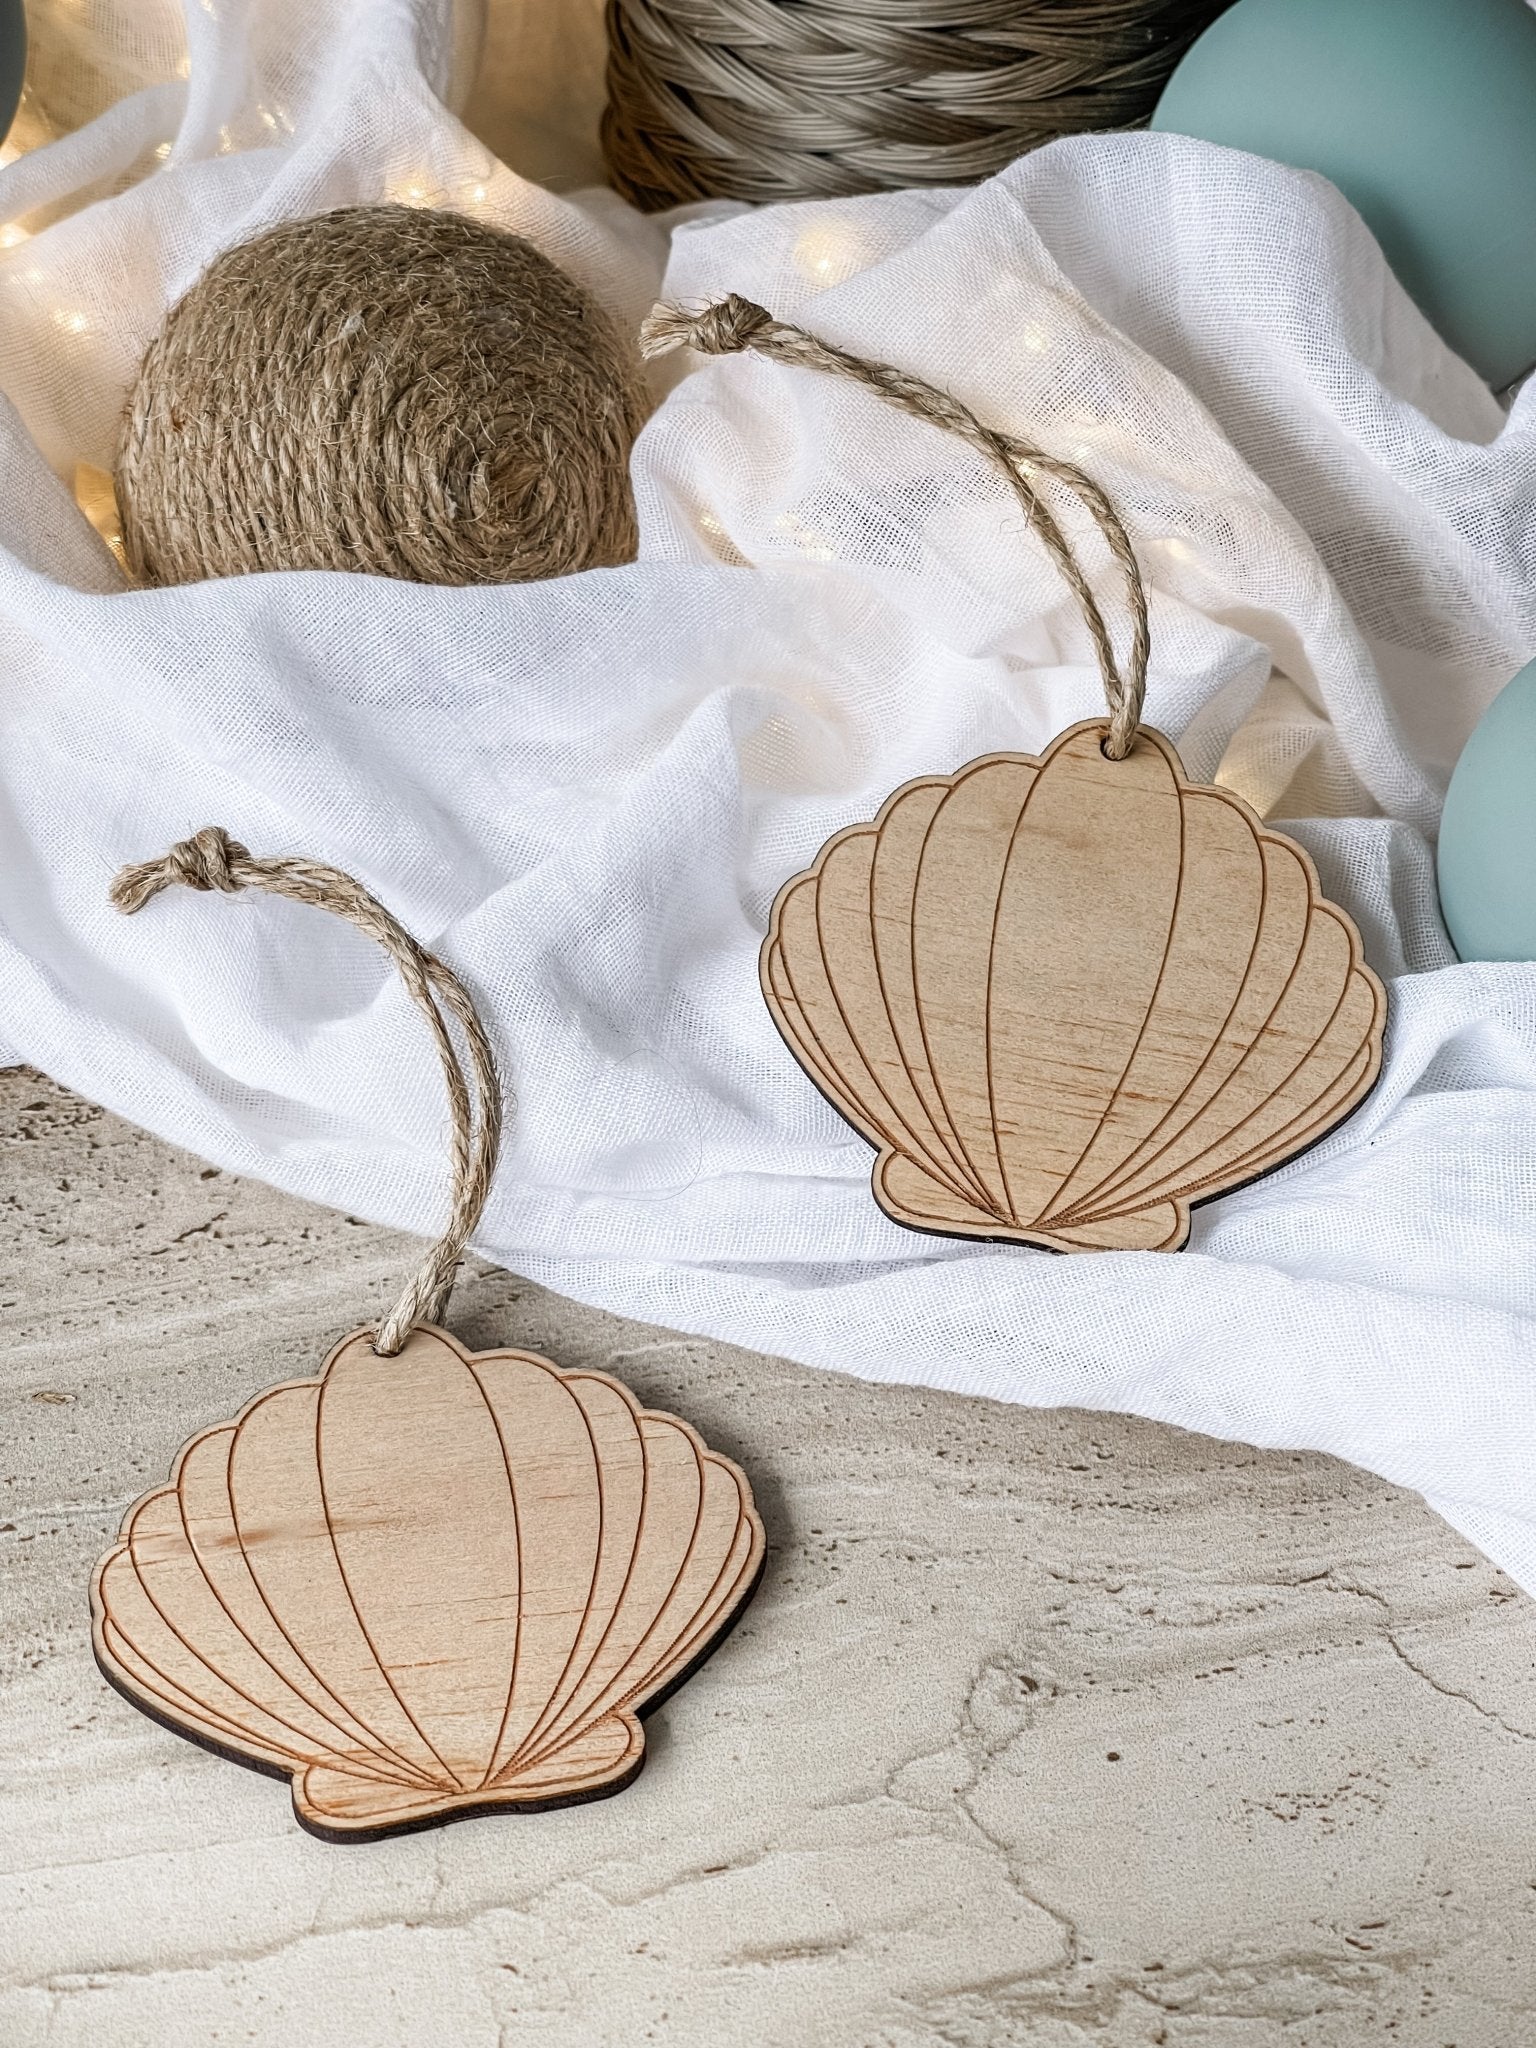 Beach Ornament - Clam Shell - The Humble Gift Co.